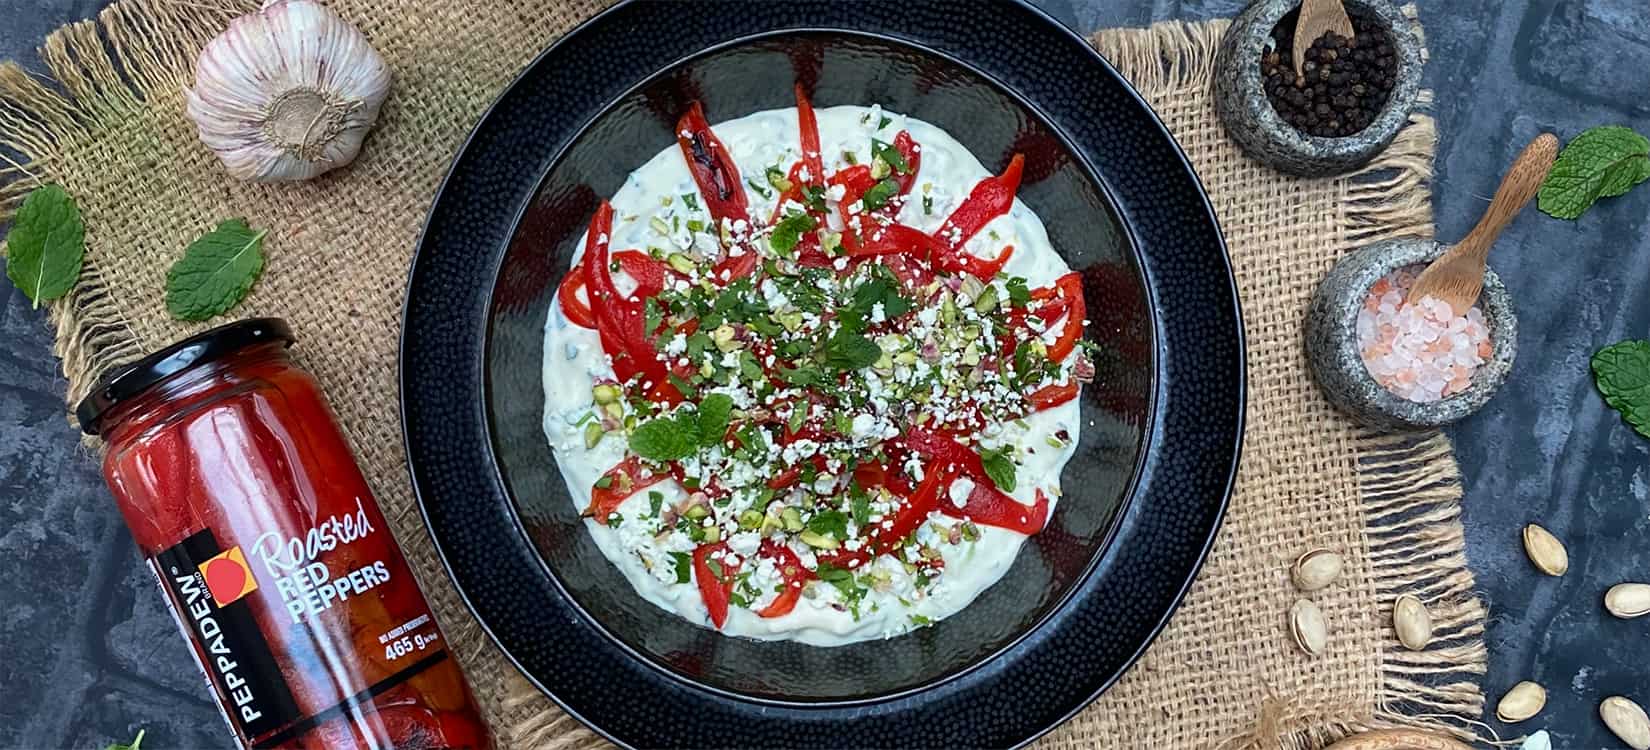 Tzatziki with Roasted Red Peppers and Crumble Topping